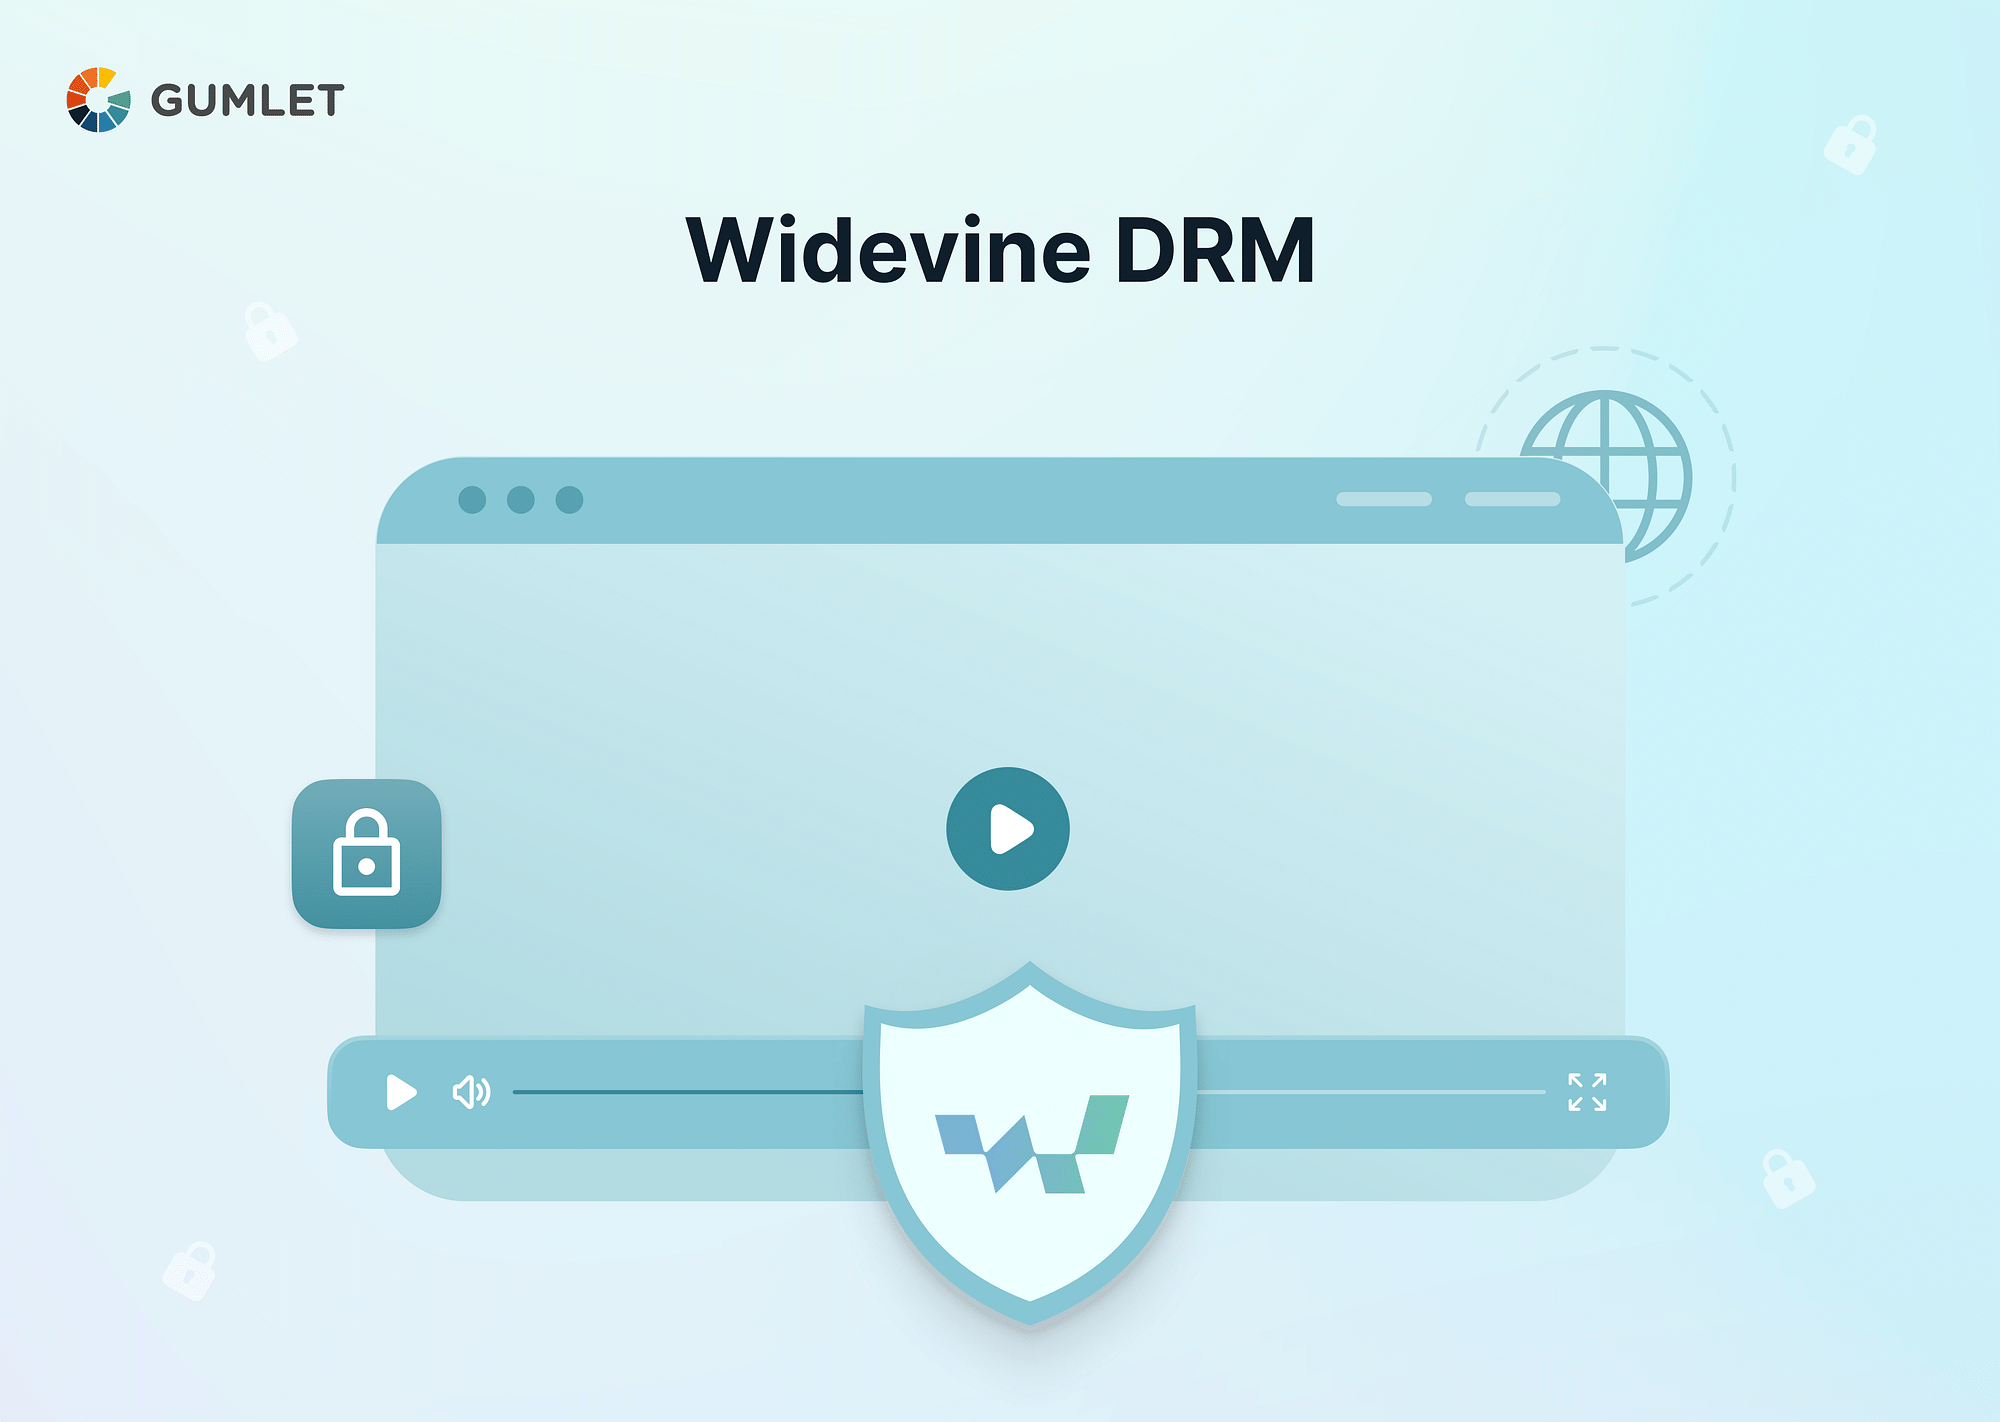 How does Google's Widevine DRM protect your Videos?